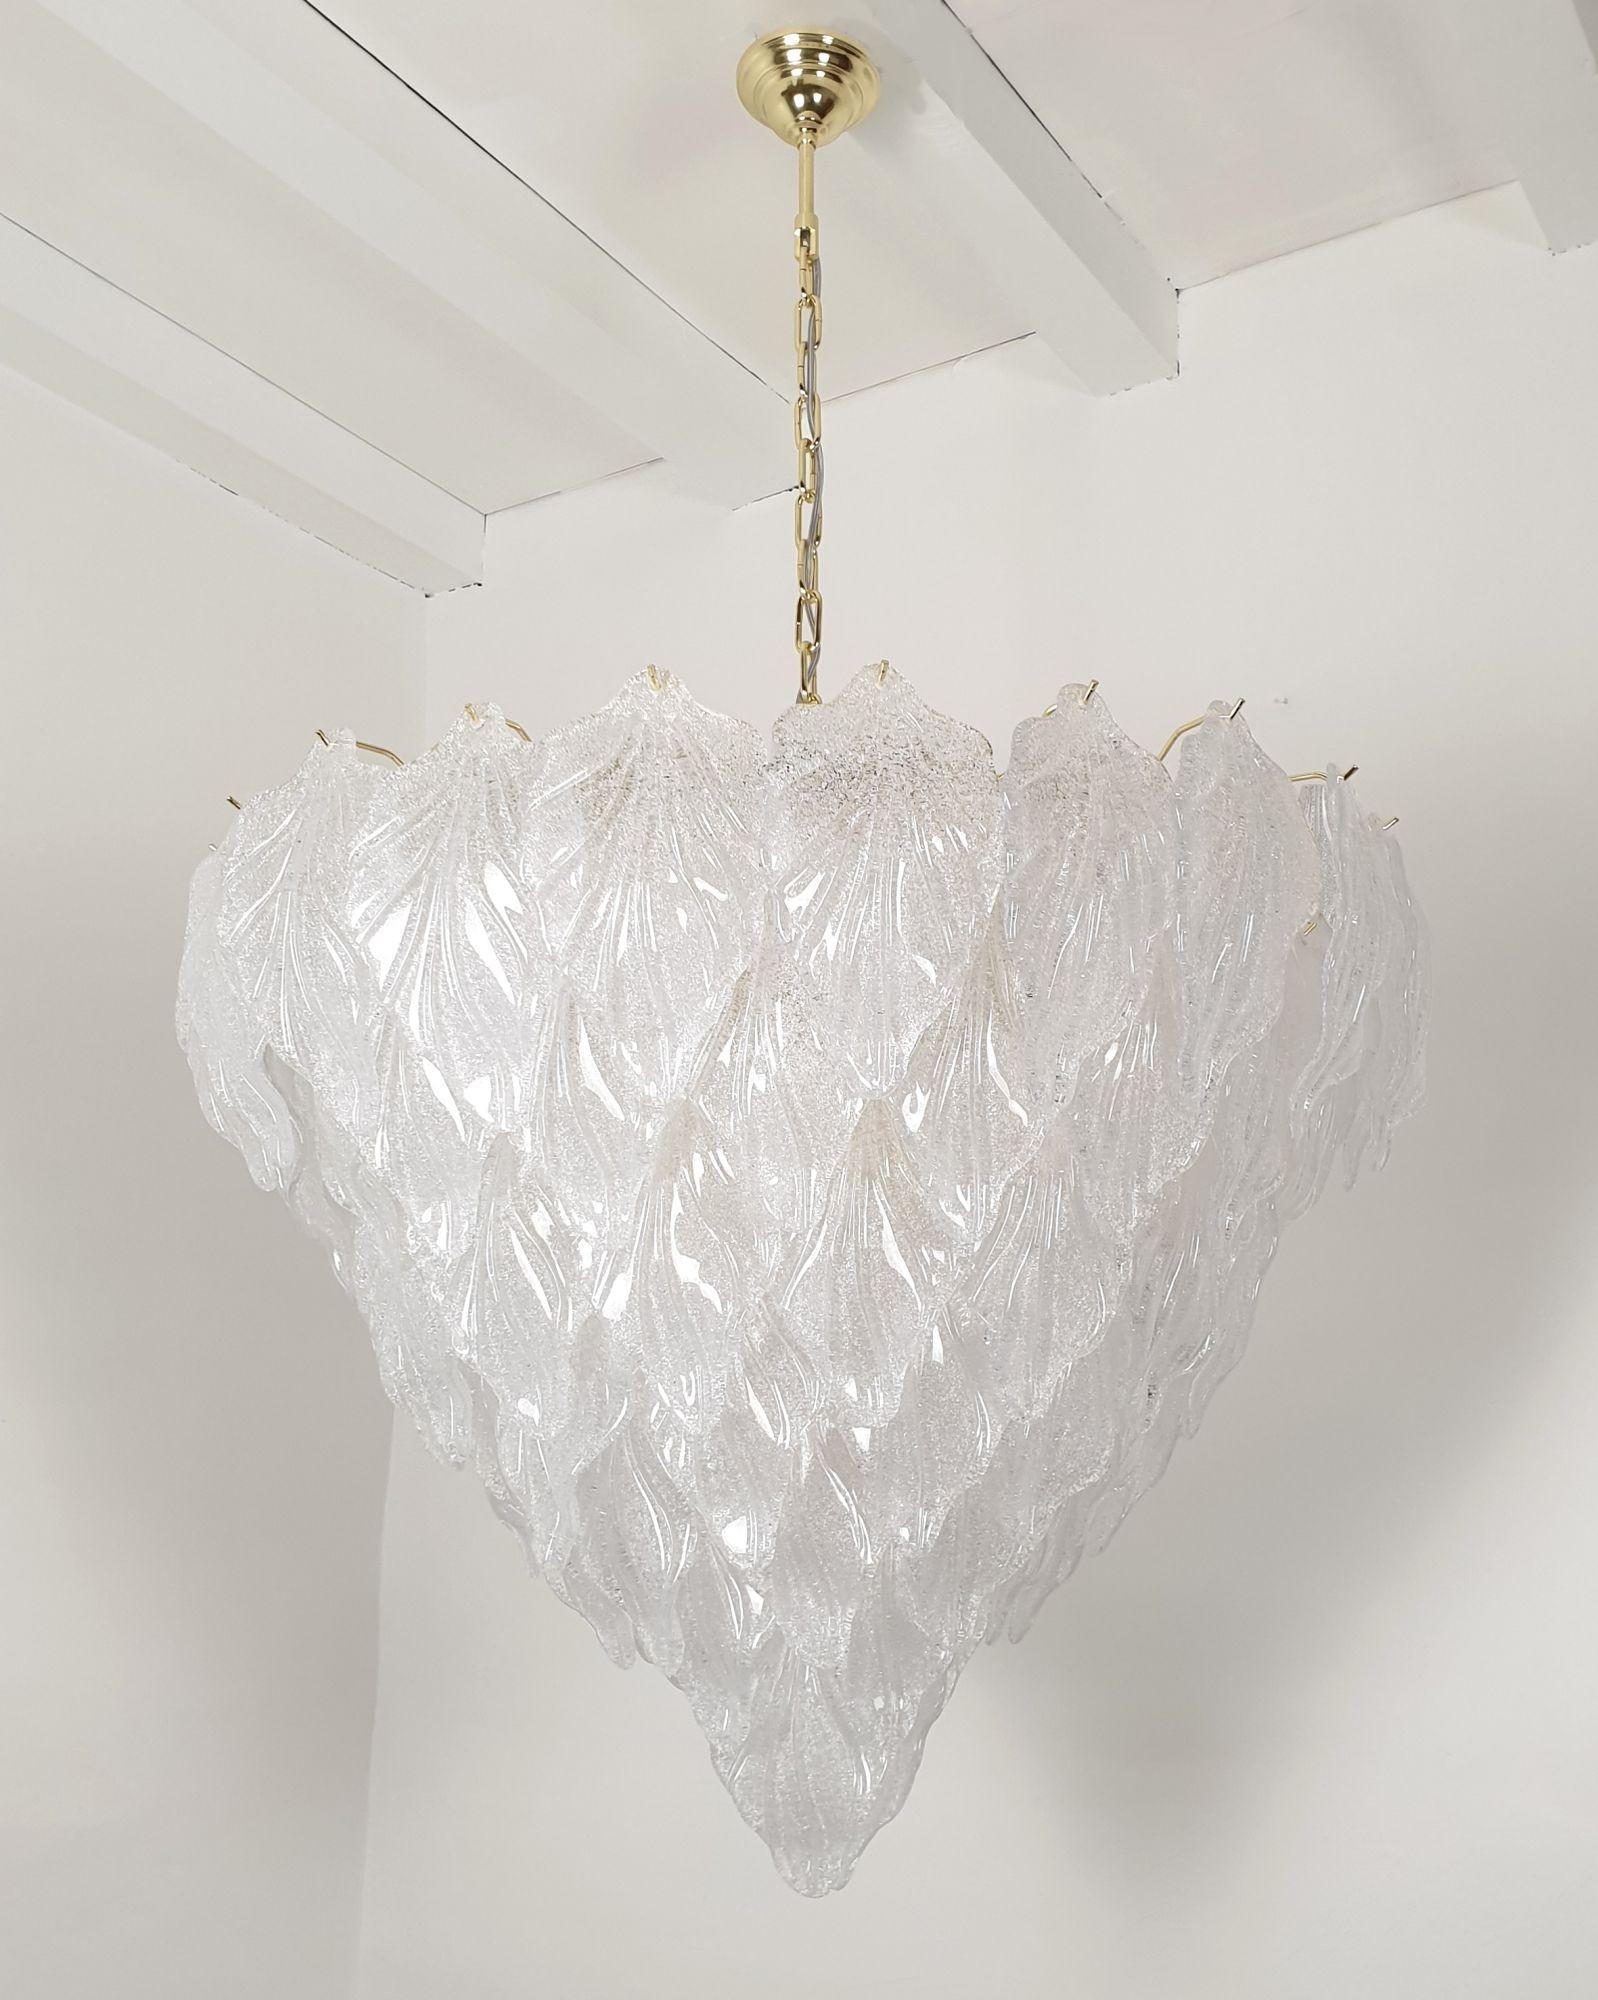 Very large Murano glass chandelier, Mid Century Modern, attributed to Barovier and Toso, Italy 1980s.
The chandelier is made of translucent Graniglia ( glass sand inside the glass leaf) leaves in Murano glass and a plated gold frame.
It has 13